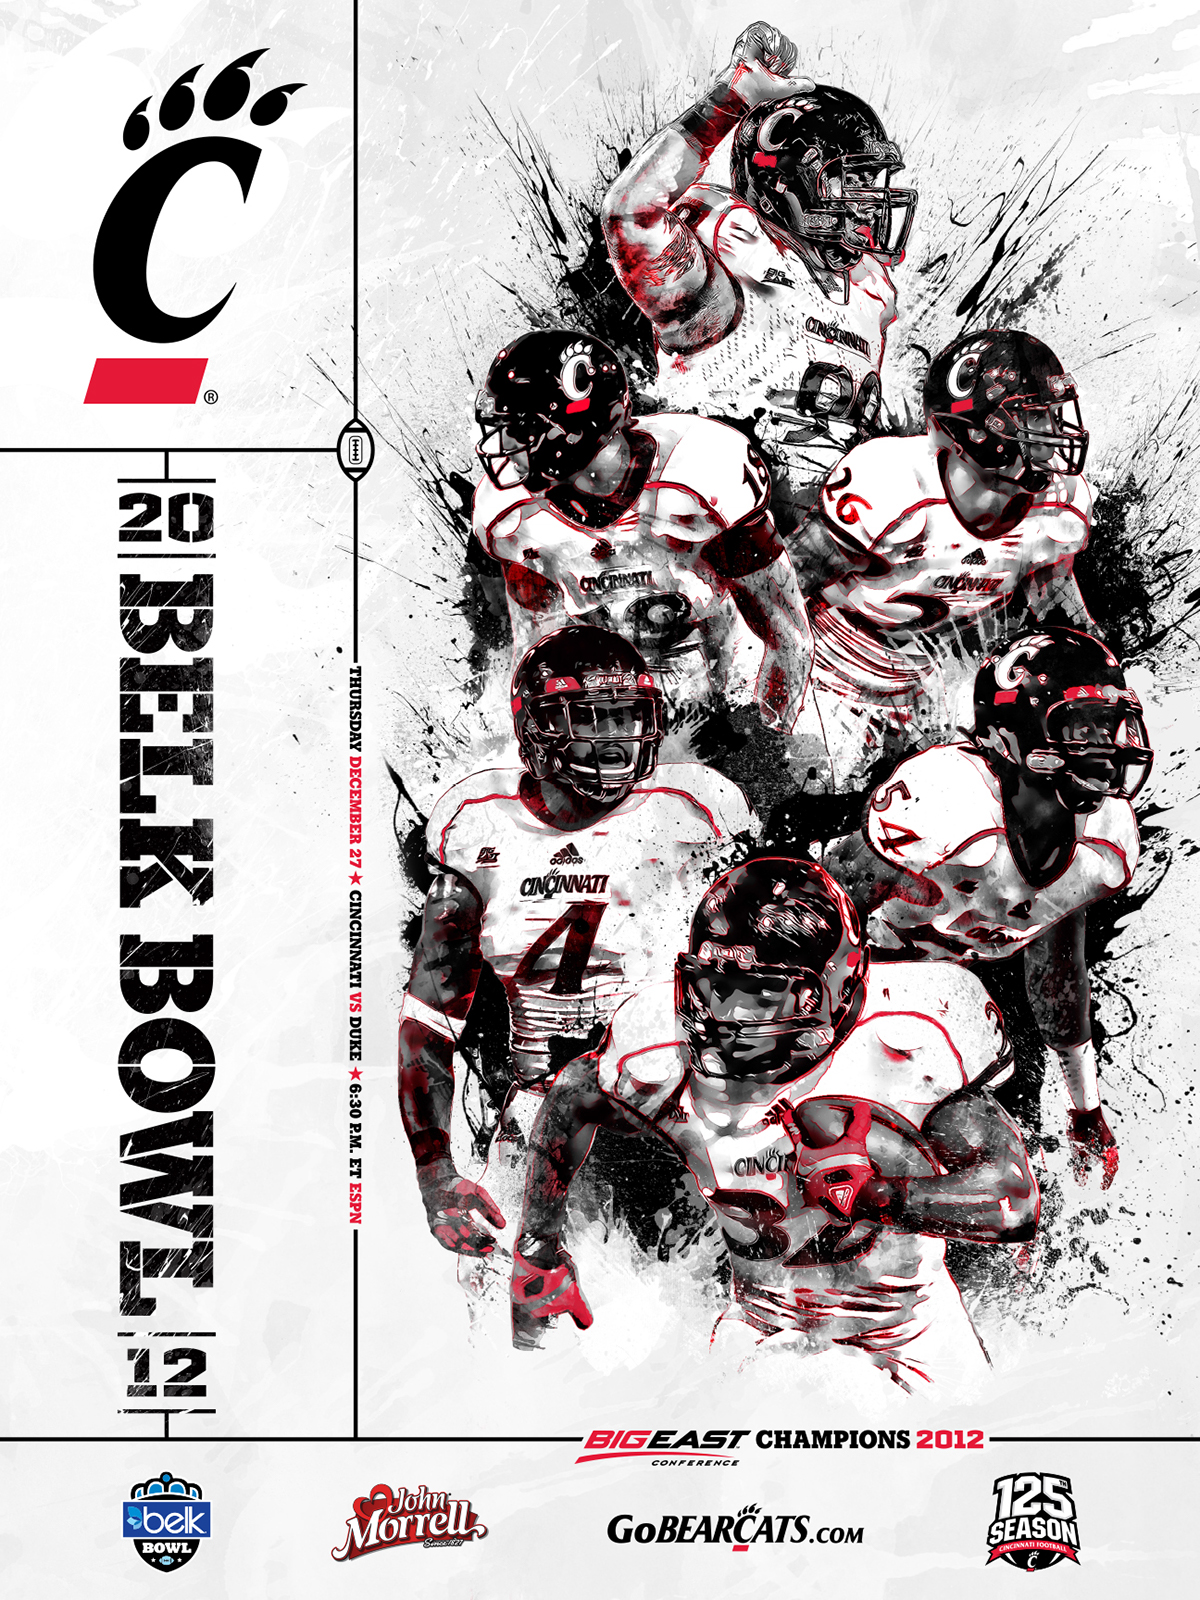 basketball sports poster NCAA photoshop paint cincinnati Bearcats Style expressive type collage soccer golf